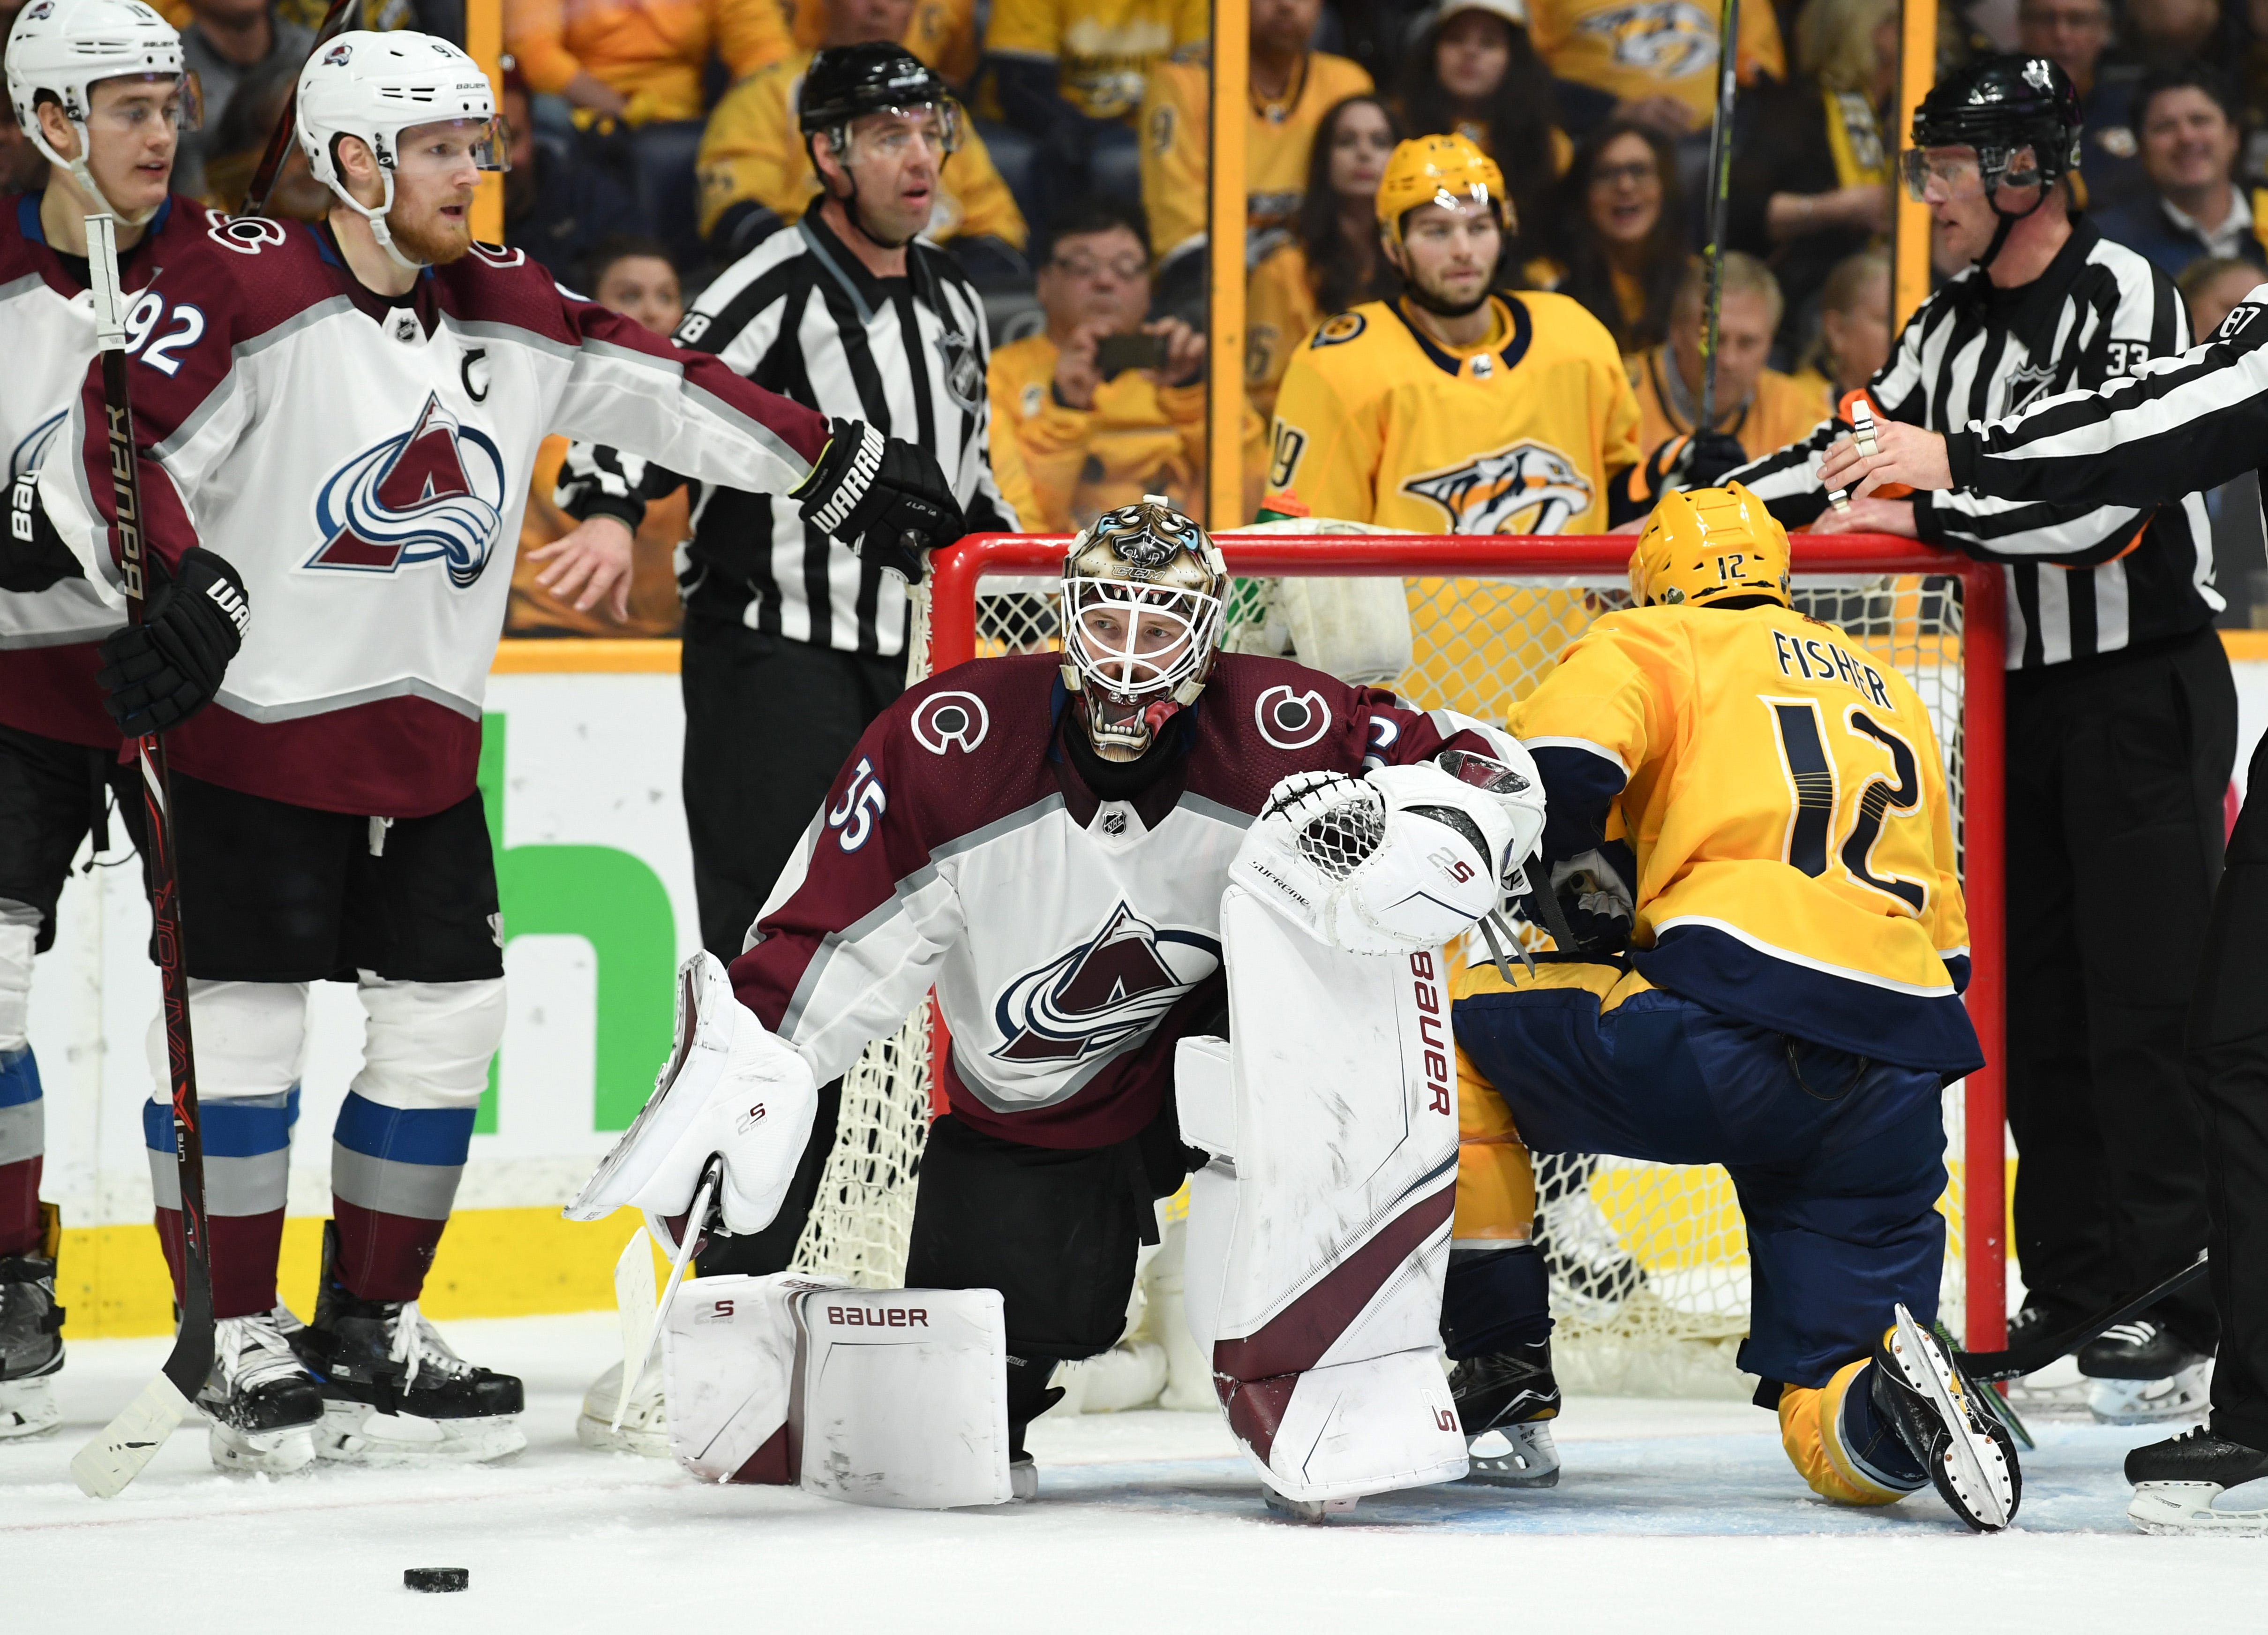 Andrew Hammond made only 1 start all year, but he saved Avalanche&apos;s season in Game 5